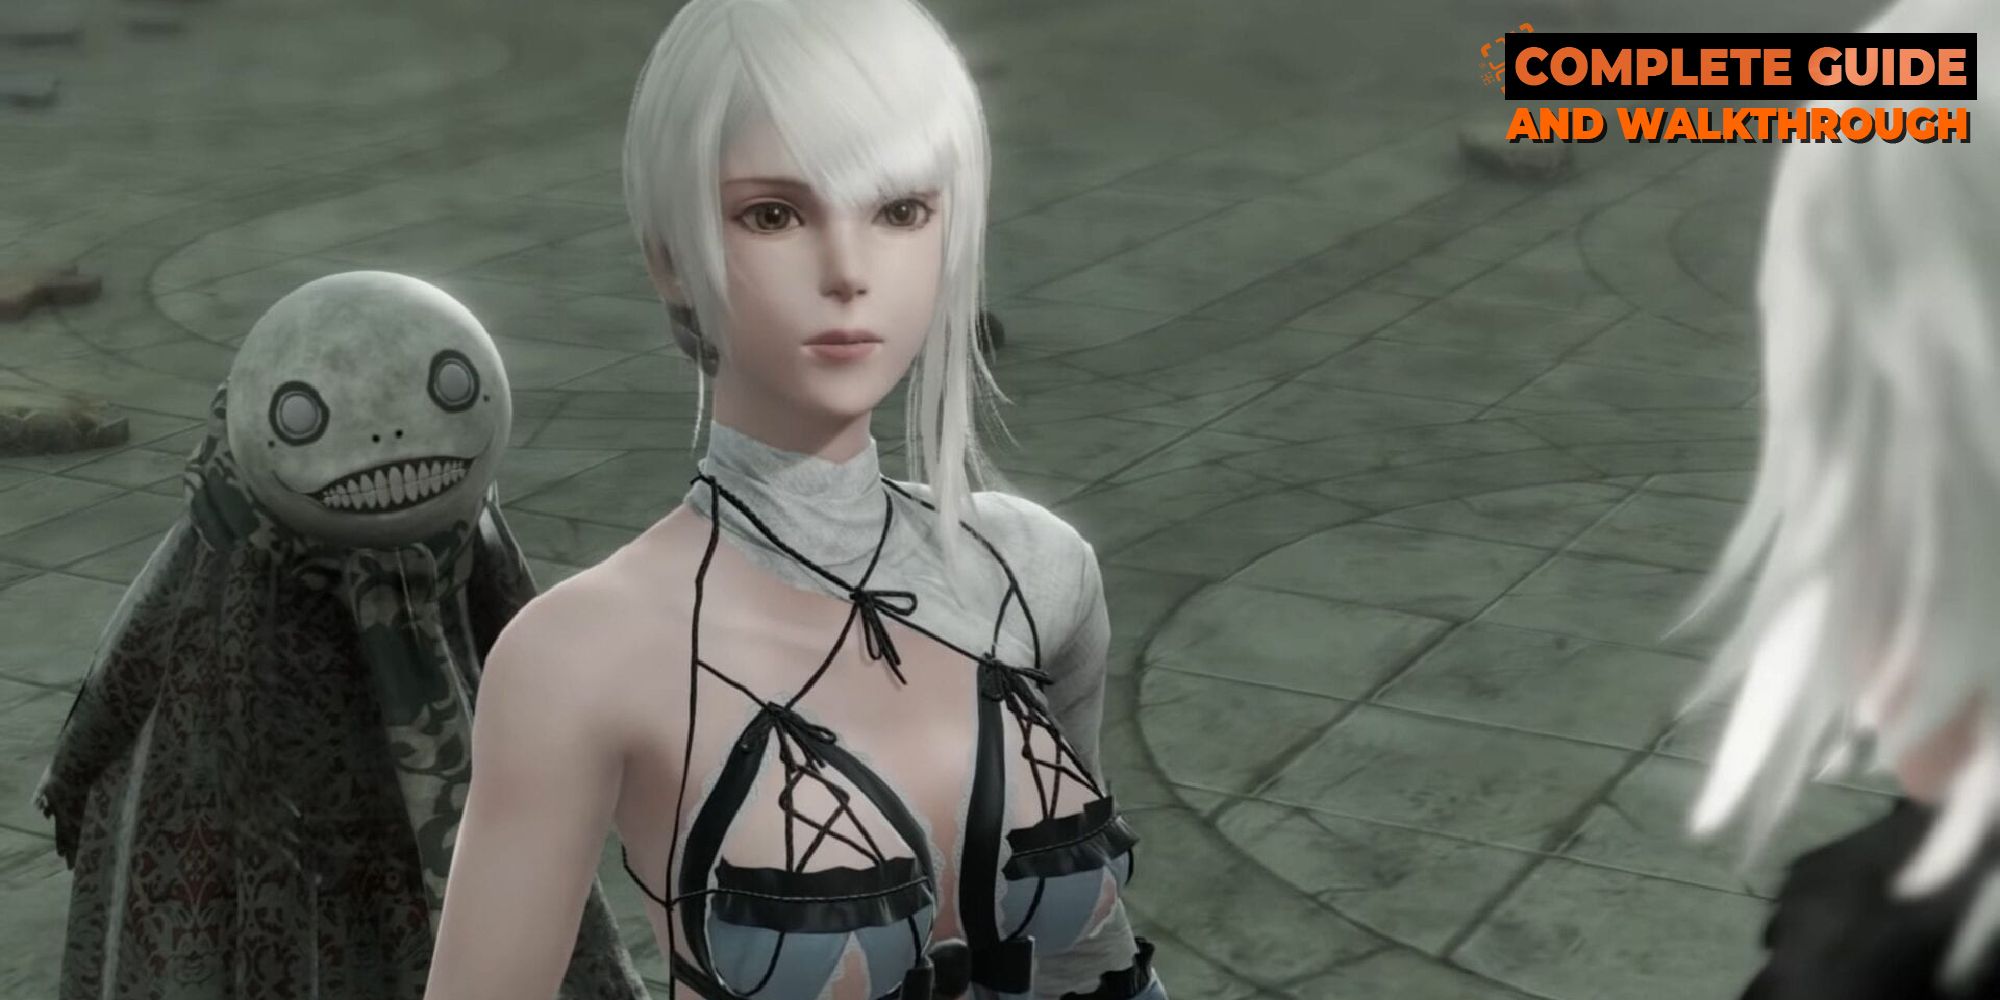 Emil and Kaine in Nier Replicant.